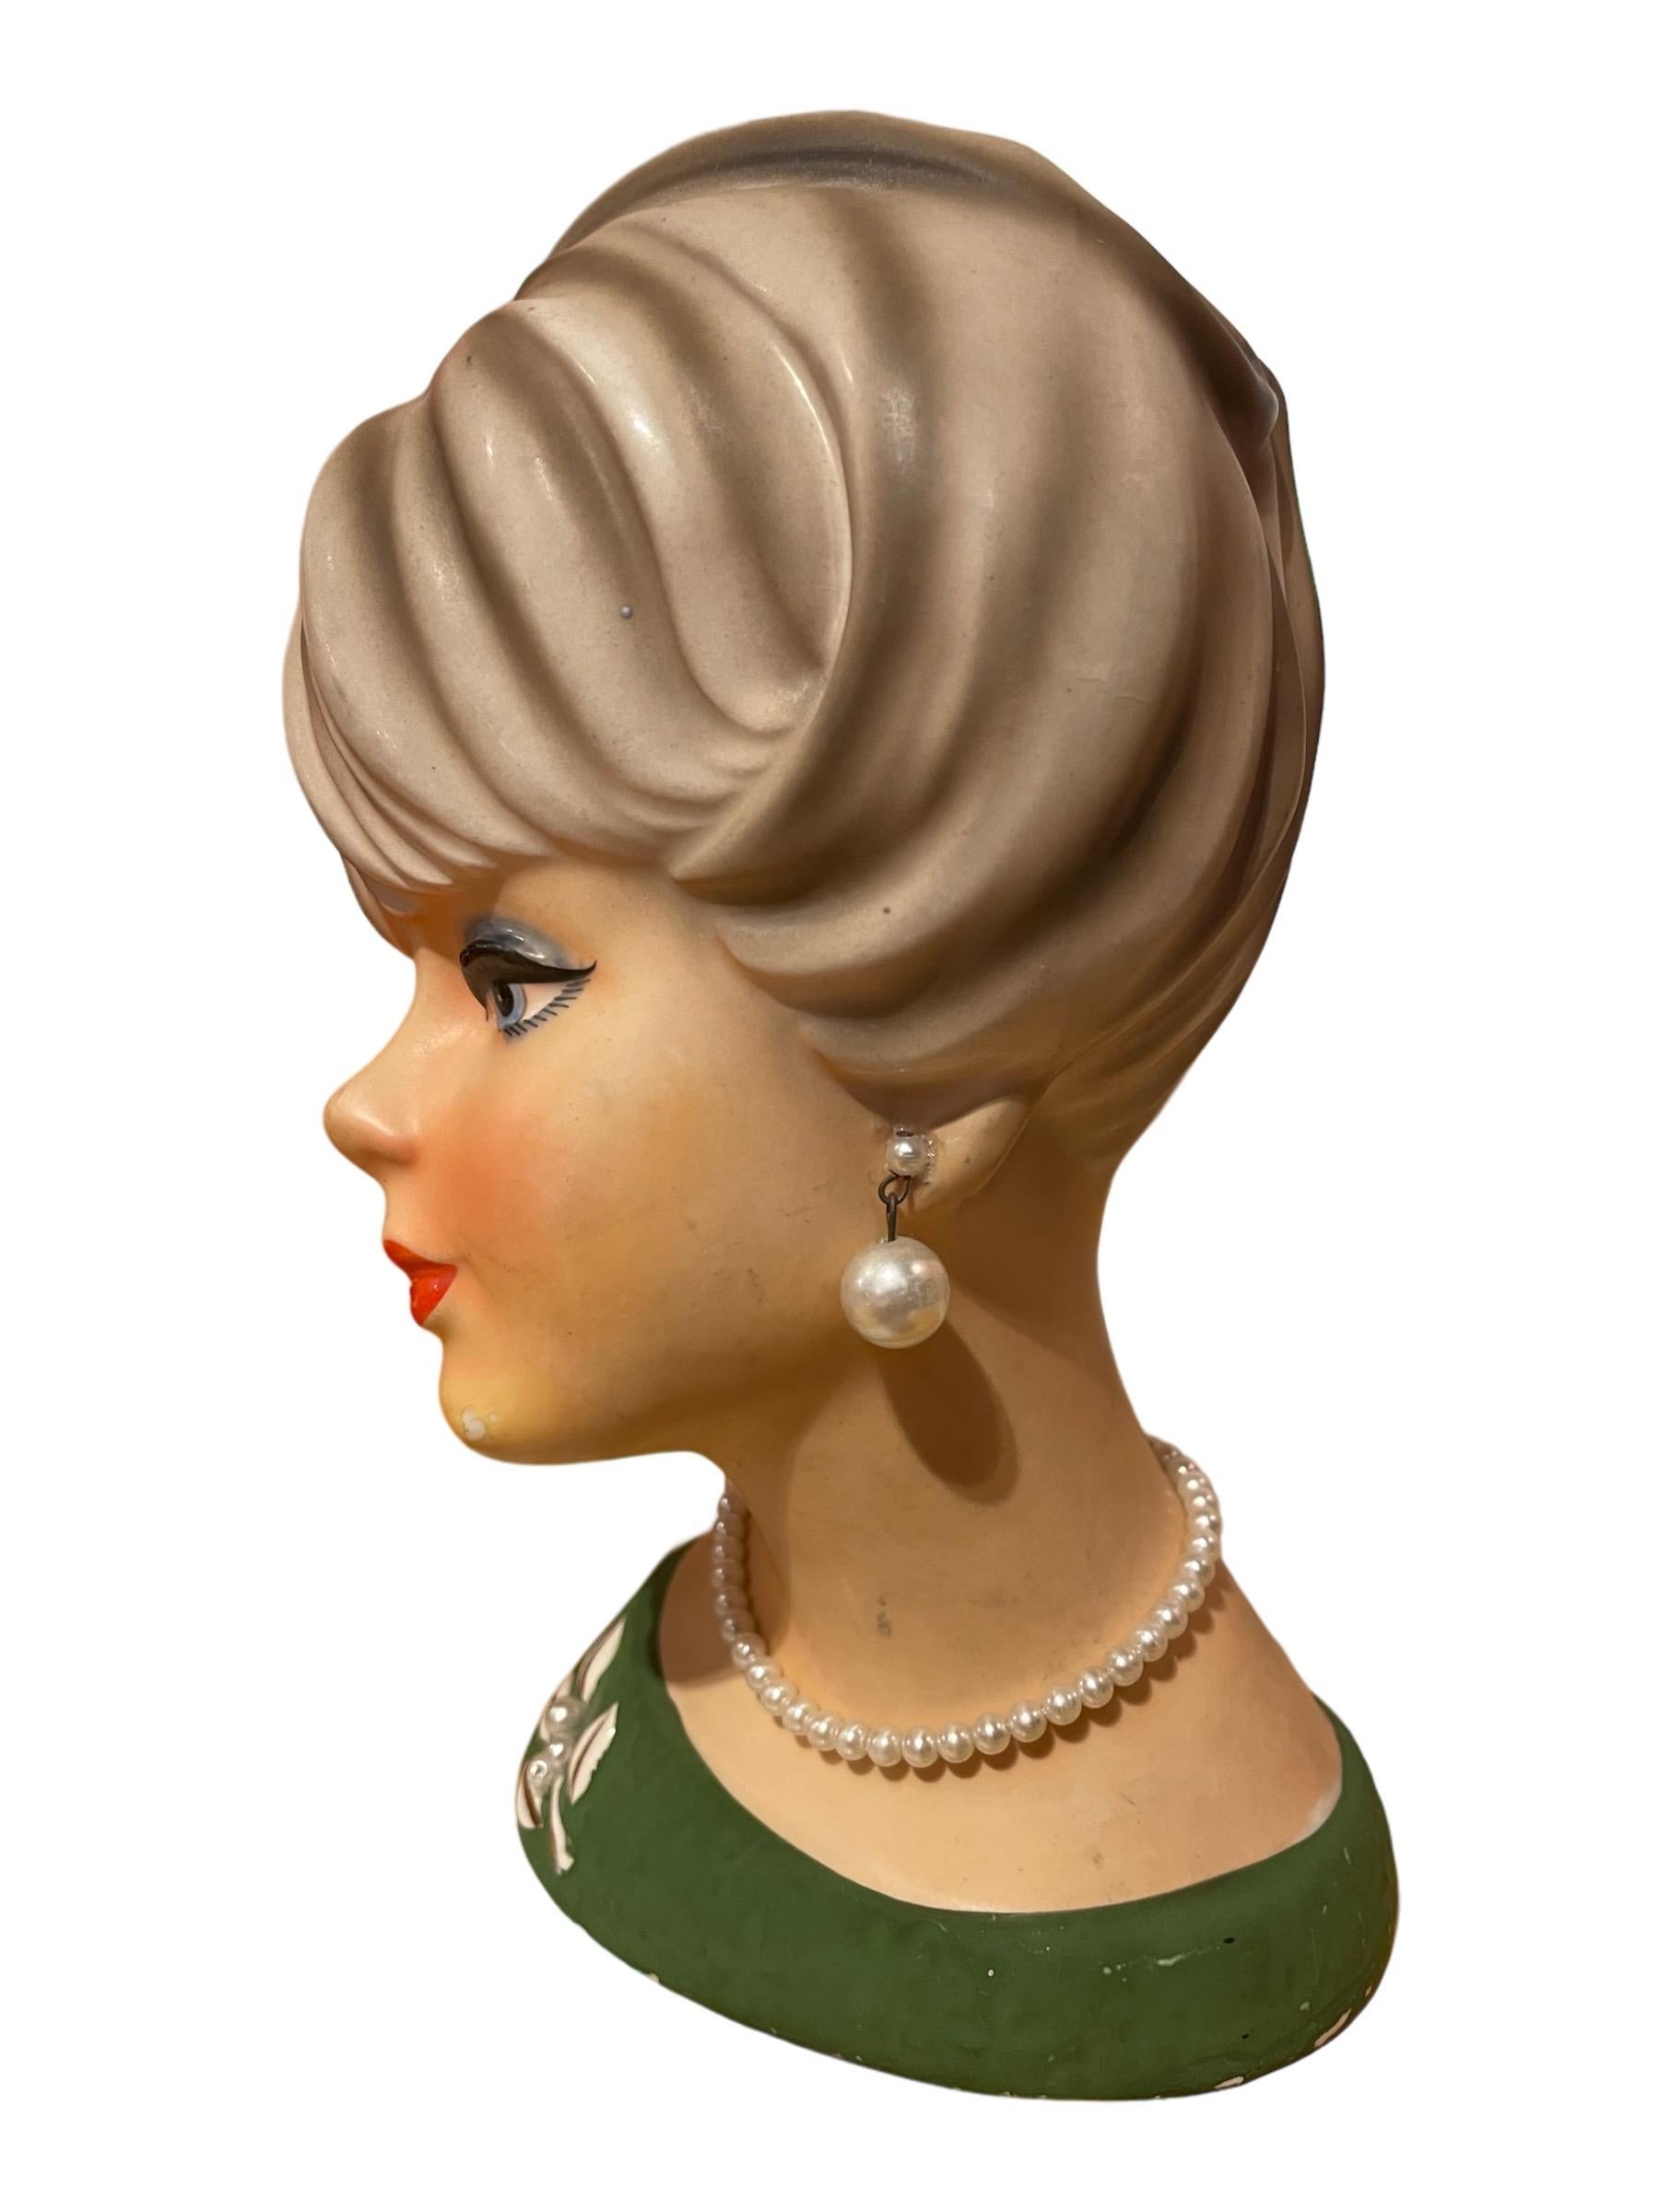 1950s Vintage Lady Head Napcoware Vase with Pearl Earrings and Necklace

Adorable 1950s lady head vase with dangling pearl earrings and pearl necklace. She is wearing a green blouse with pearl accent brooch.

Small paint chip on chin and slight